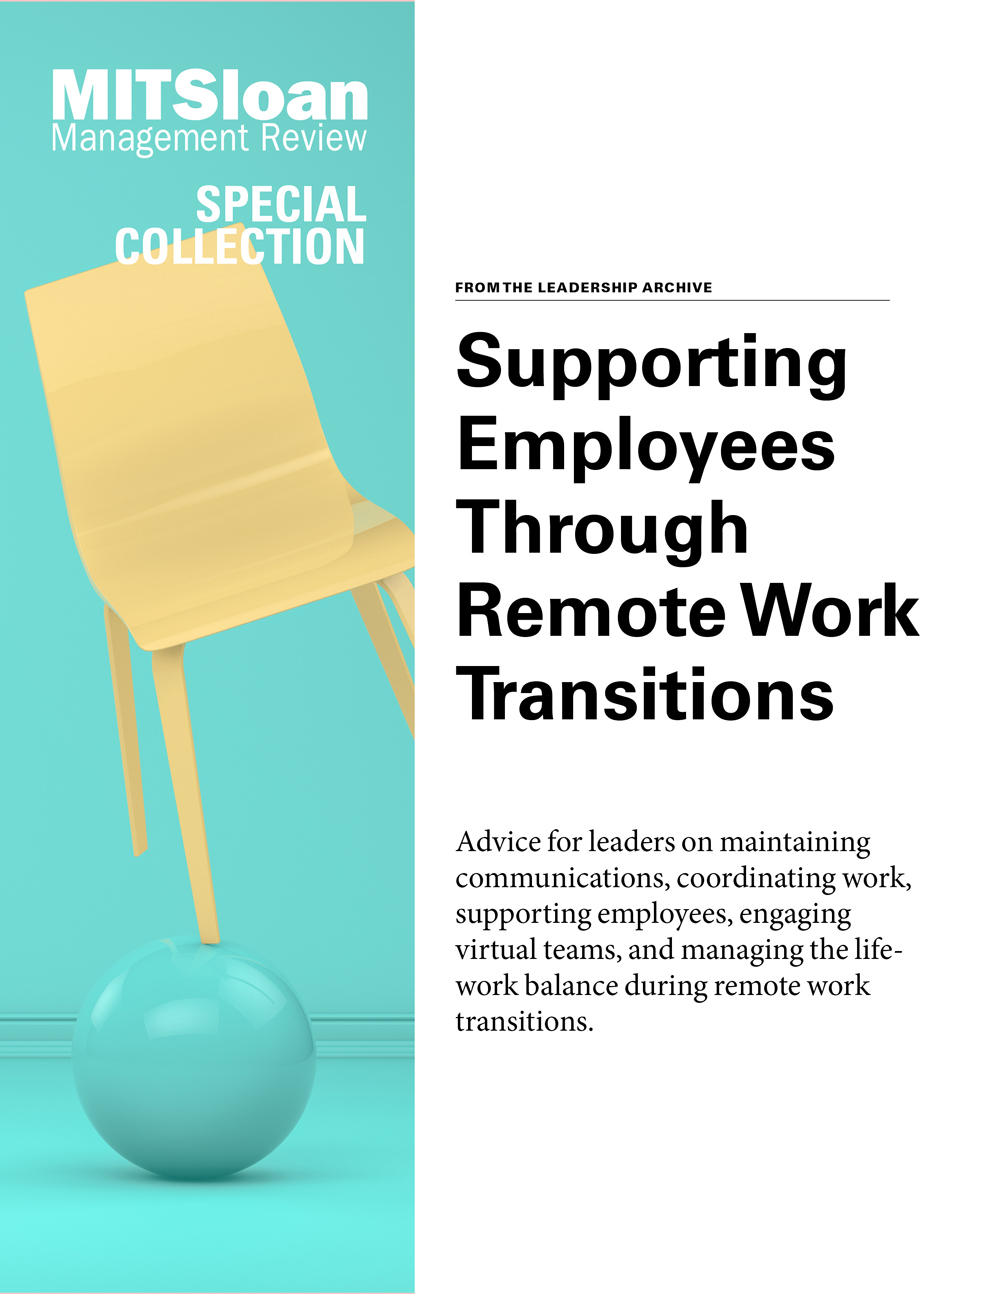 Supporting Employees Through Remote Work Transitions - MIT SMR Store